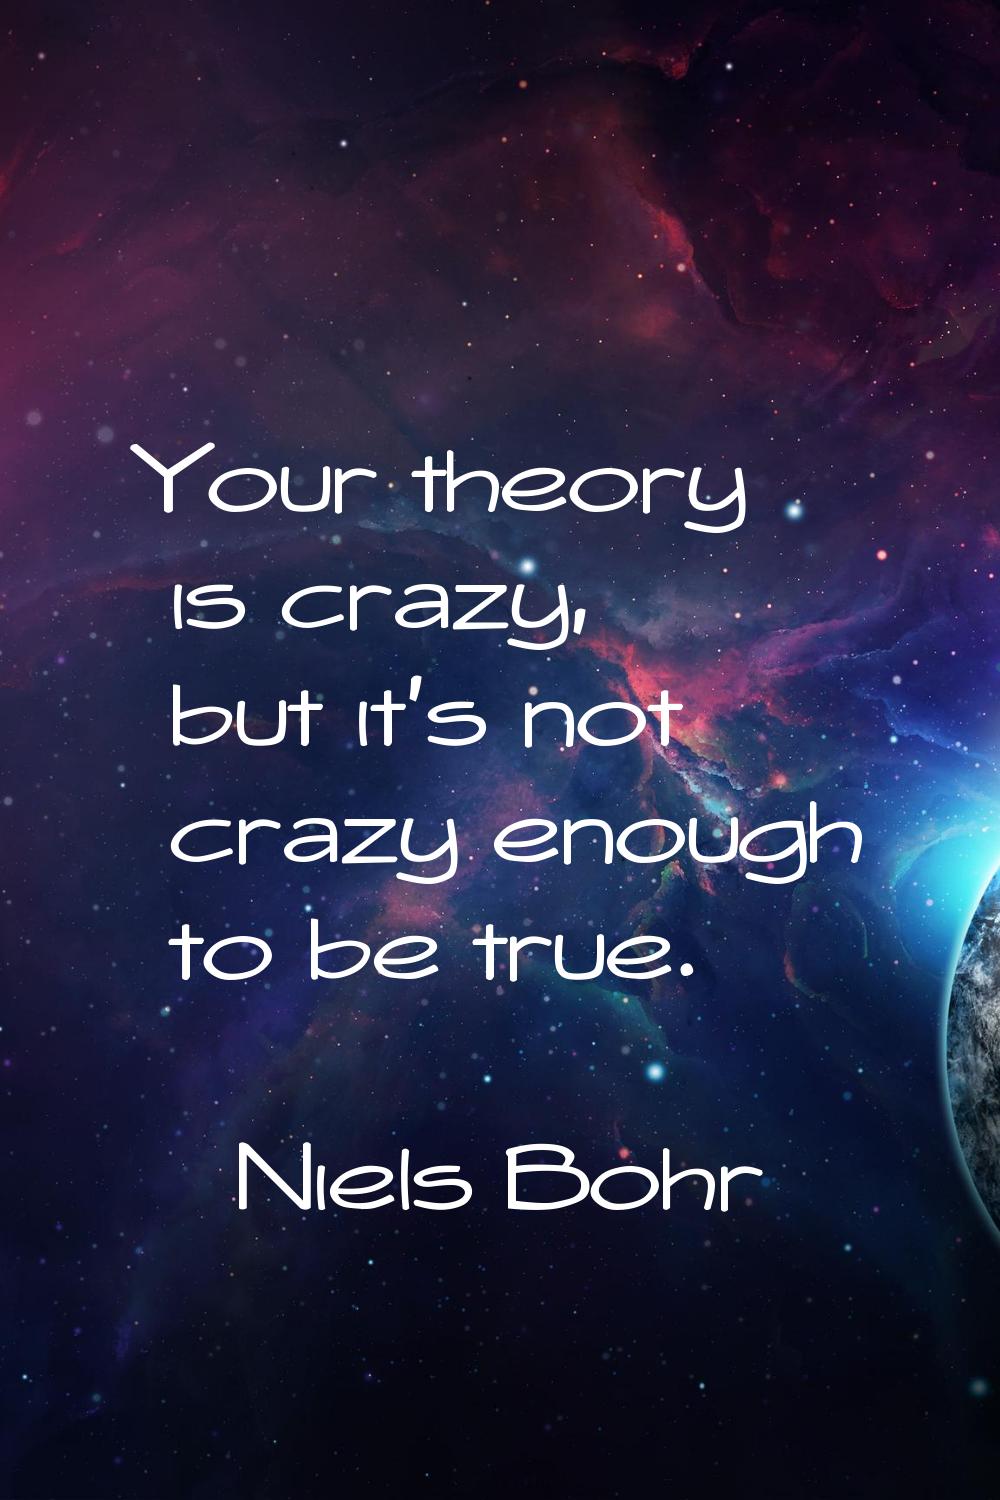 Your theory is crazy, but it's not crazy enough to be true.